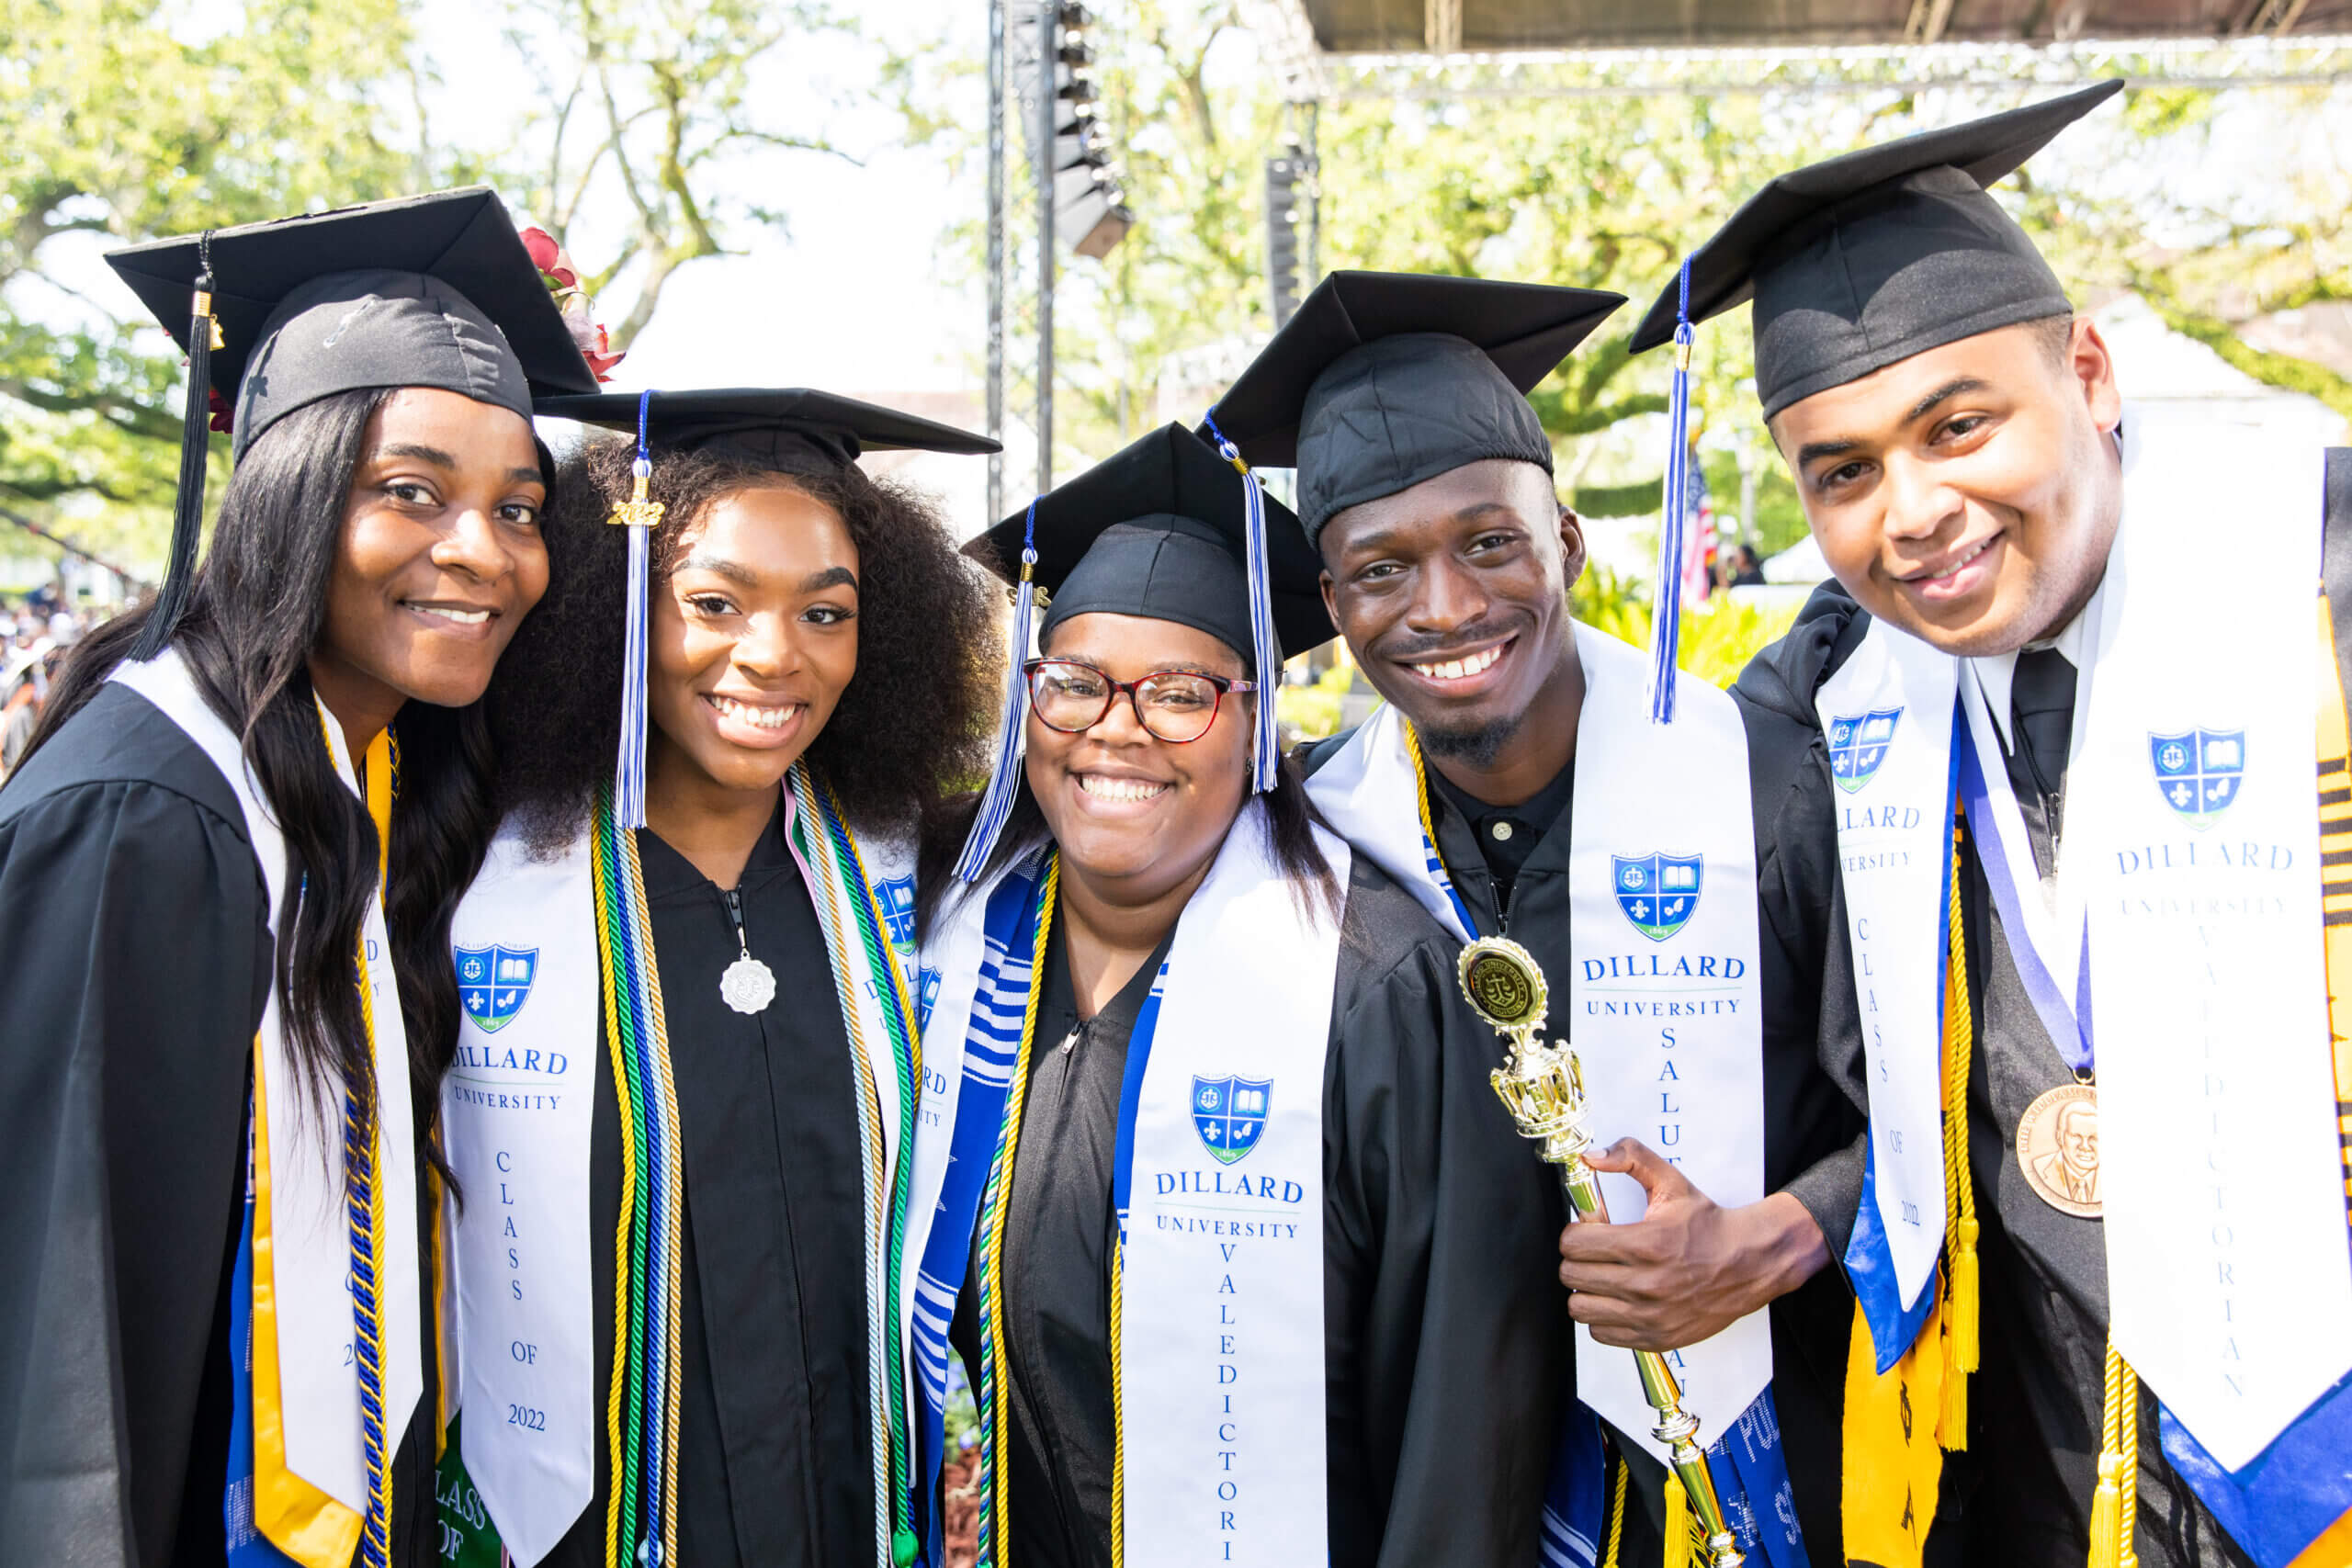 dillard university commencement - students in cap and gown